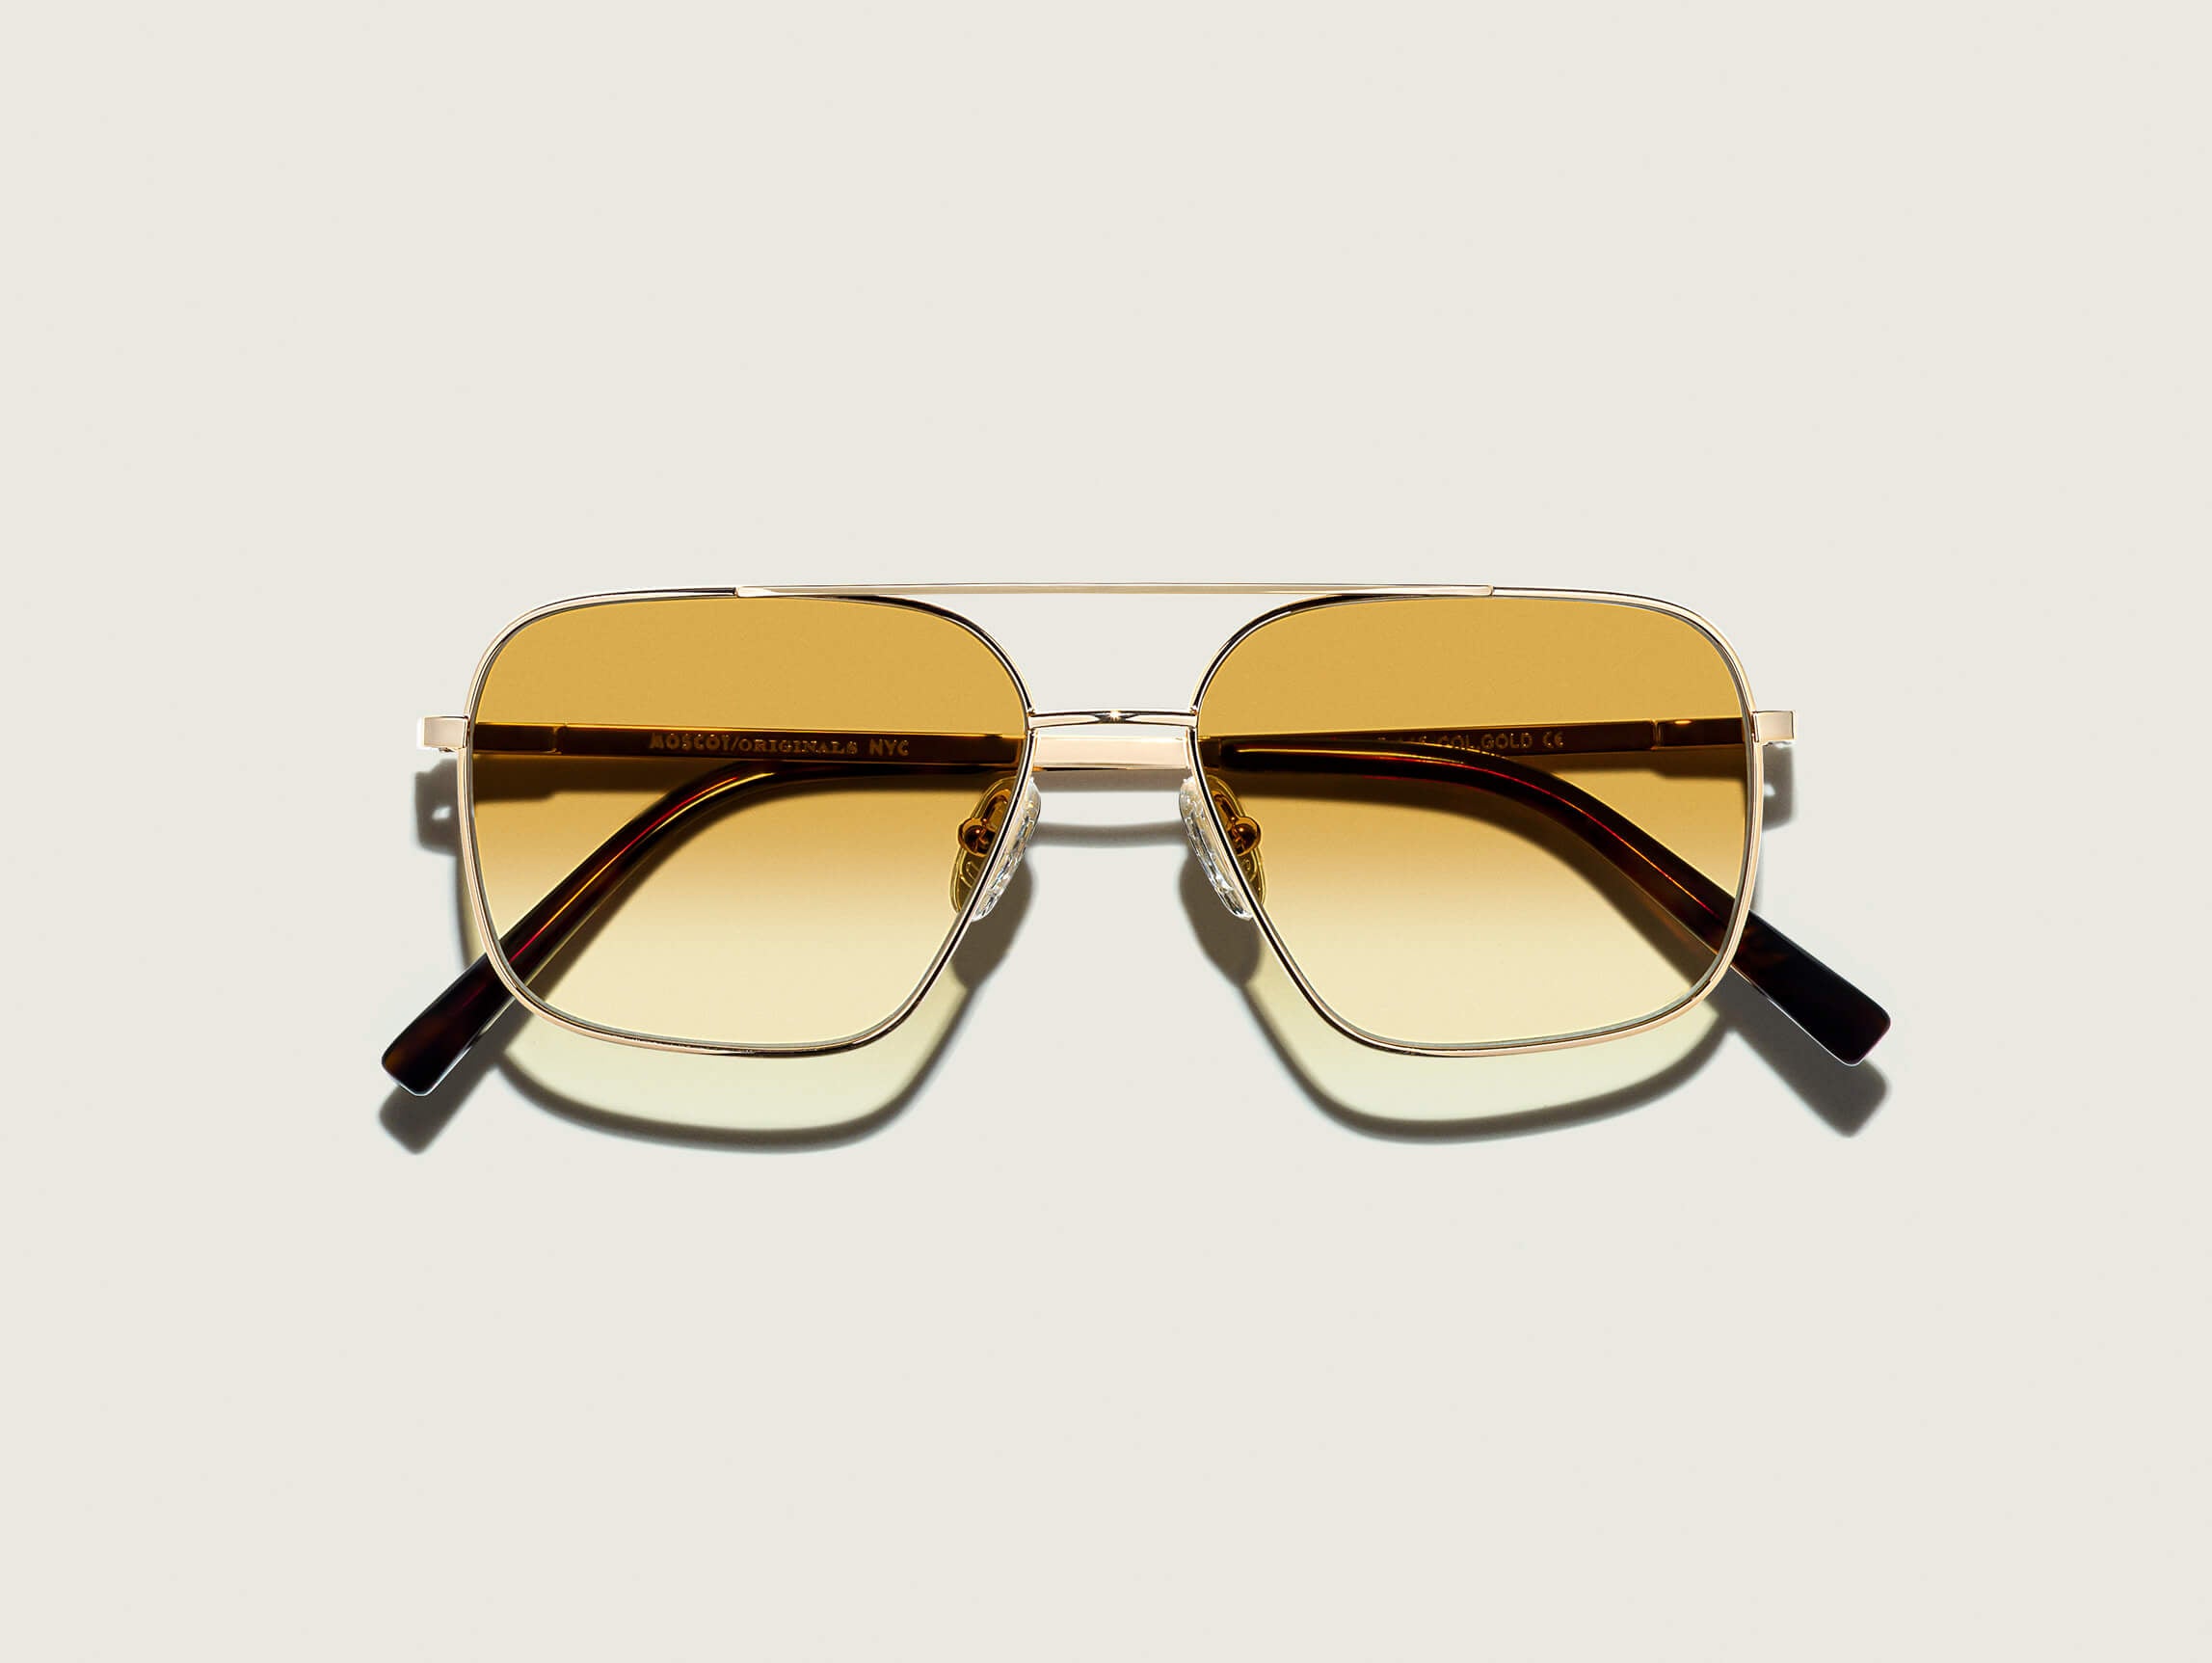 #color_chestnut fade | The SHTARKER in Gold with Chestnut Fade Tinted Lenses